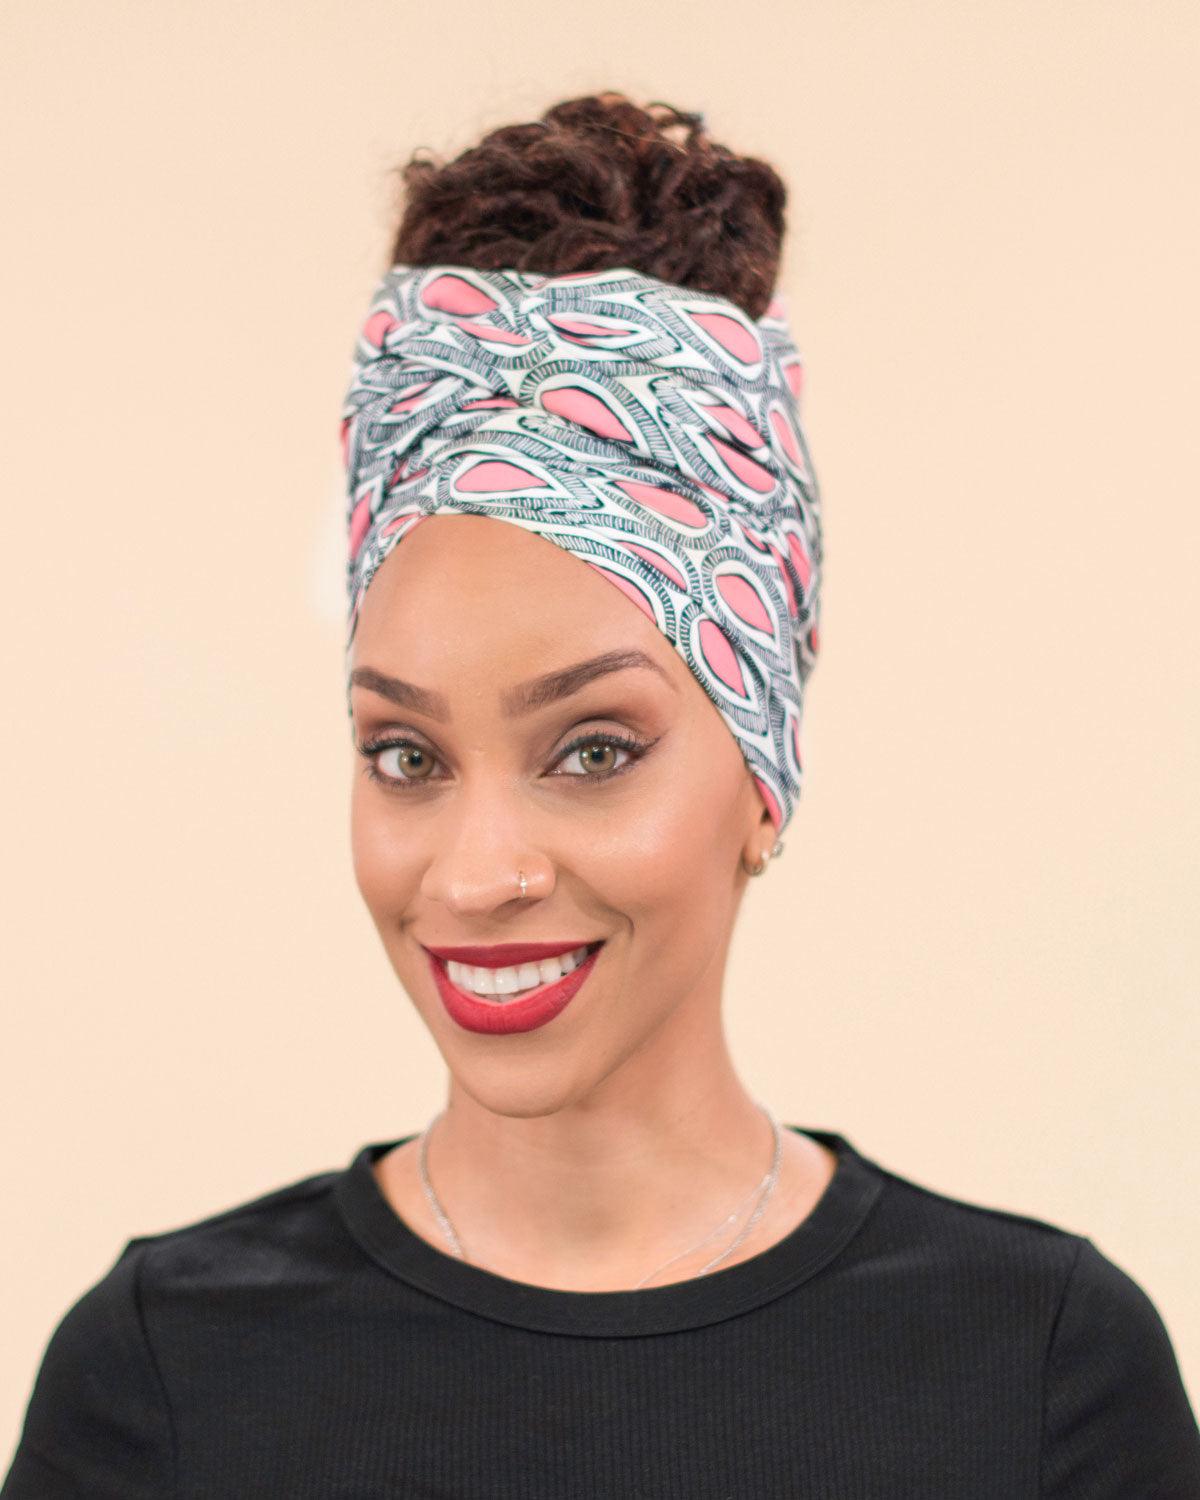 Katelyn uses our Ashanti Head Wrap for this look